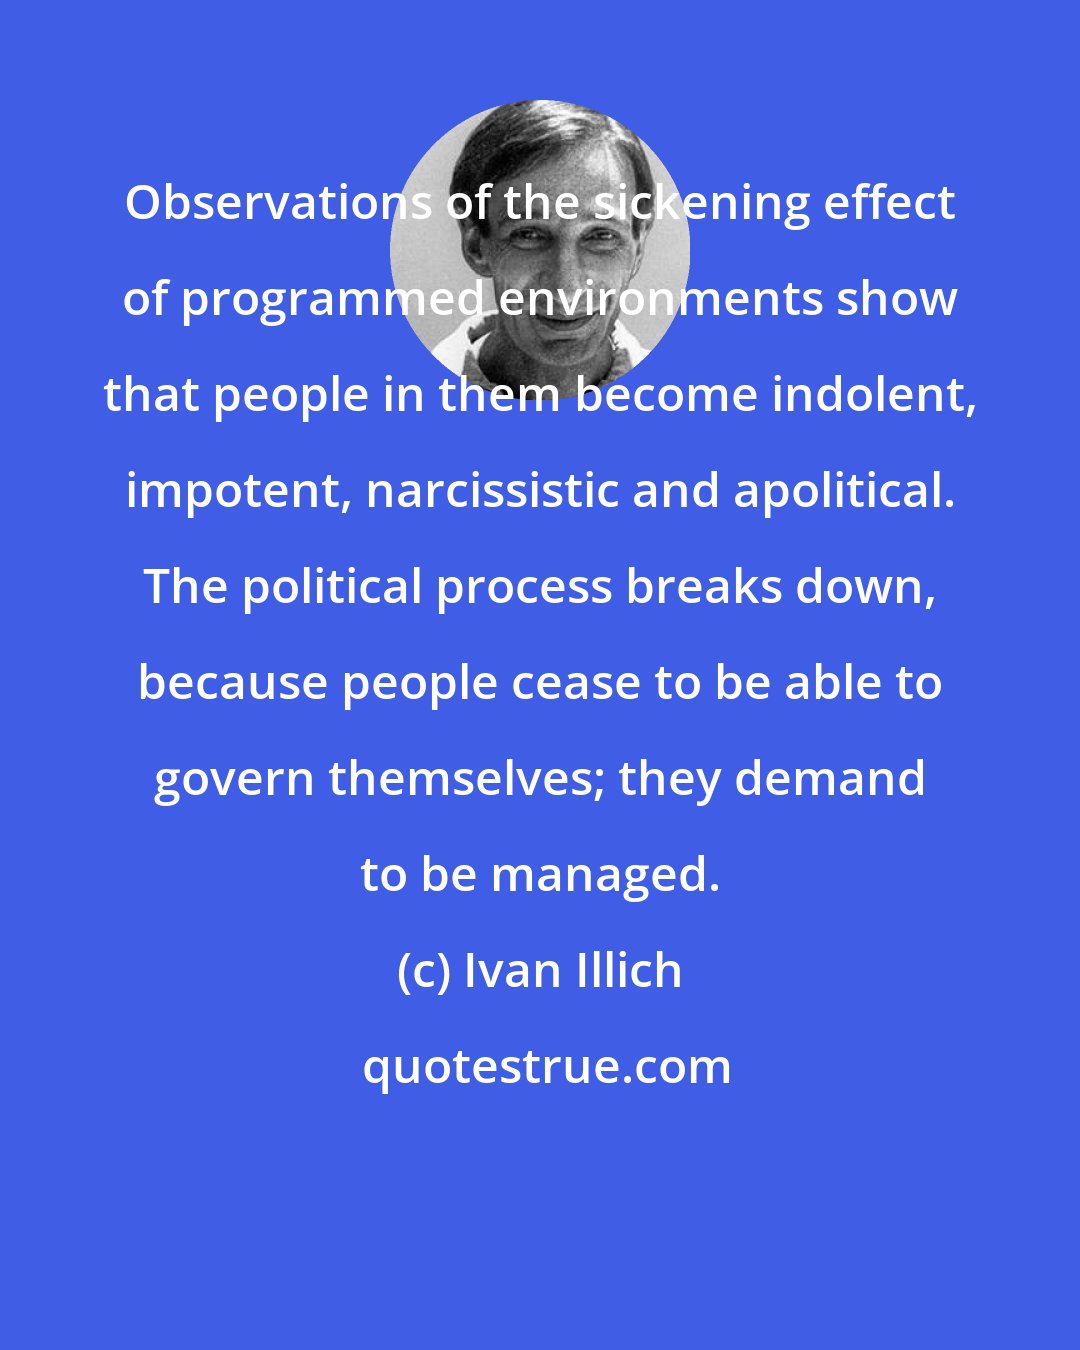 Ivan Illich: Observations of the sickening effect of programmed environments show that people in them become indolent, impotent, narcissistic and apolitical. The political process breaks down, because people cease to be able to govern themselves; they demand to be managed.